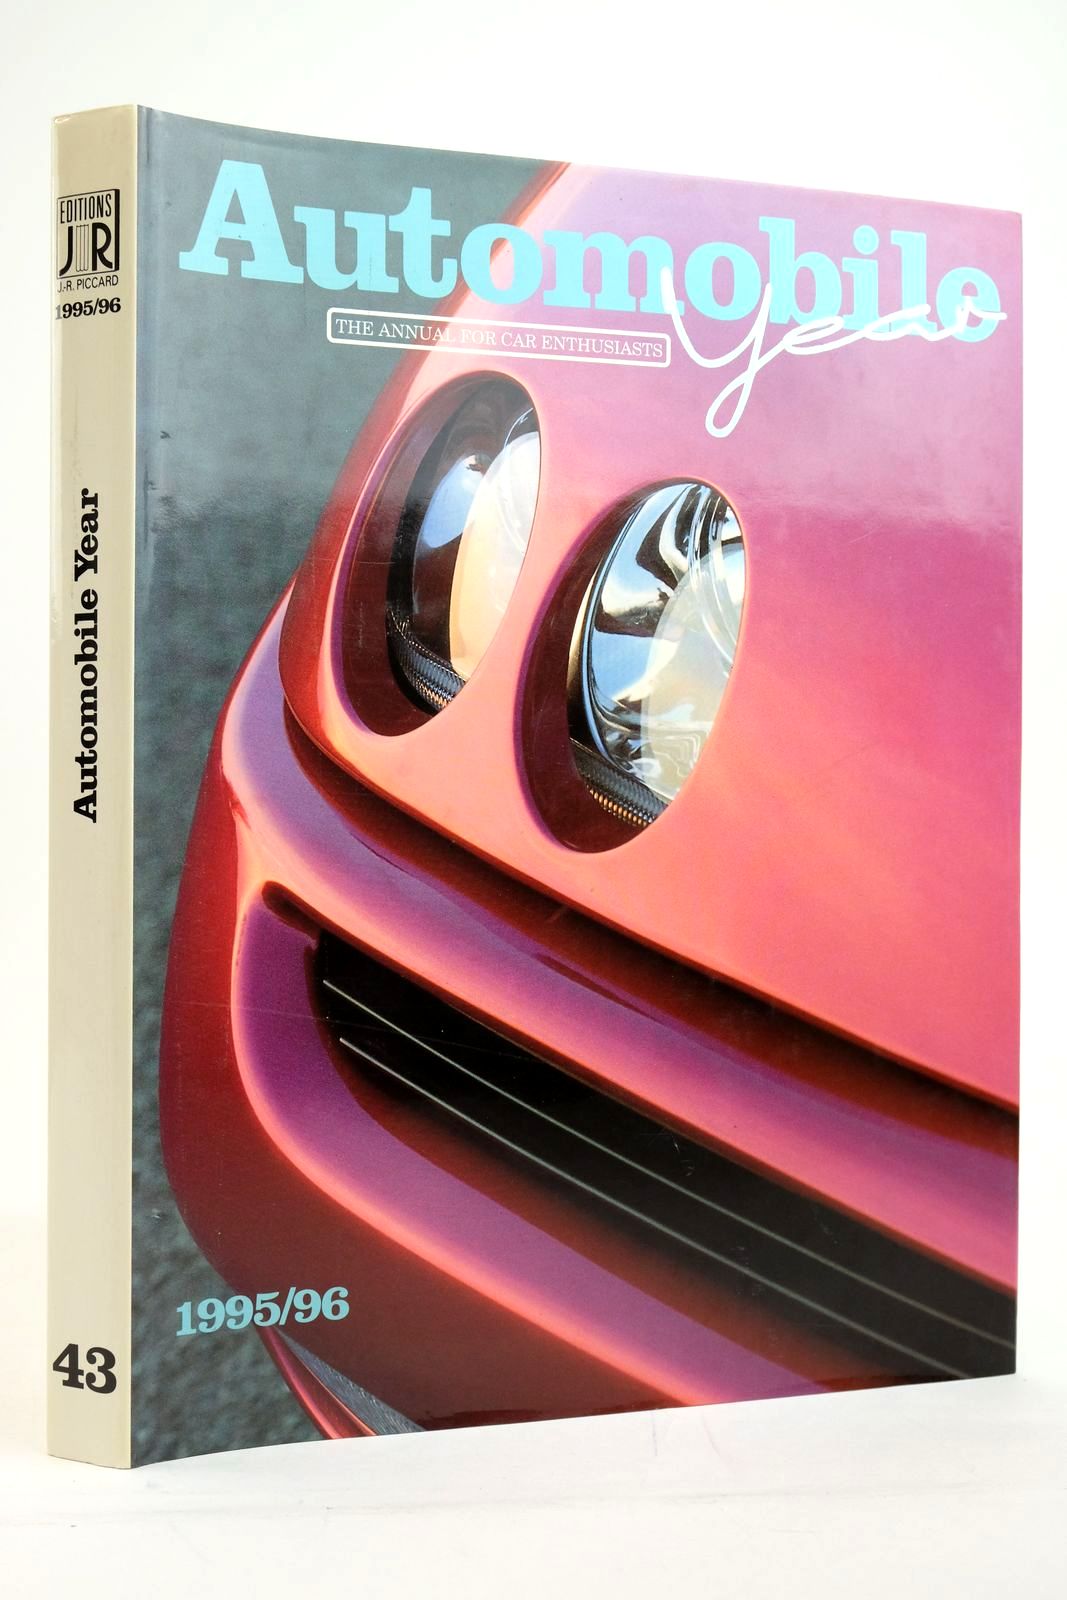 Photo of AUTOMOBILE YEAR No. 43 1995/96 written by Norris, Ian published by Editions Jr (STOCK CODE: 2135337)  for sale by Stella & Rose's Books